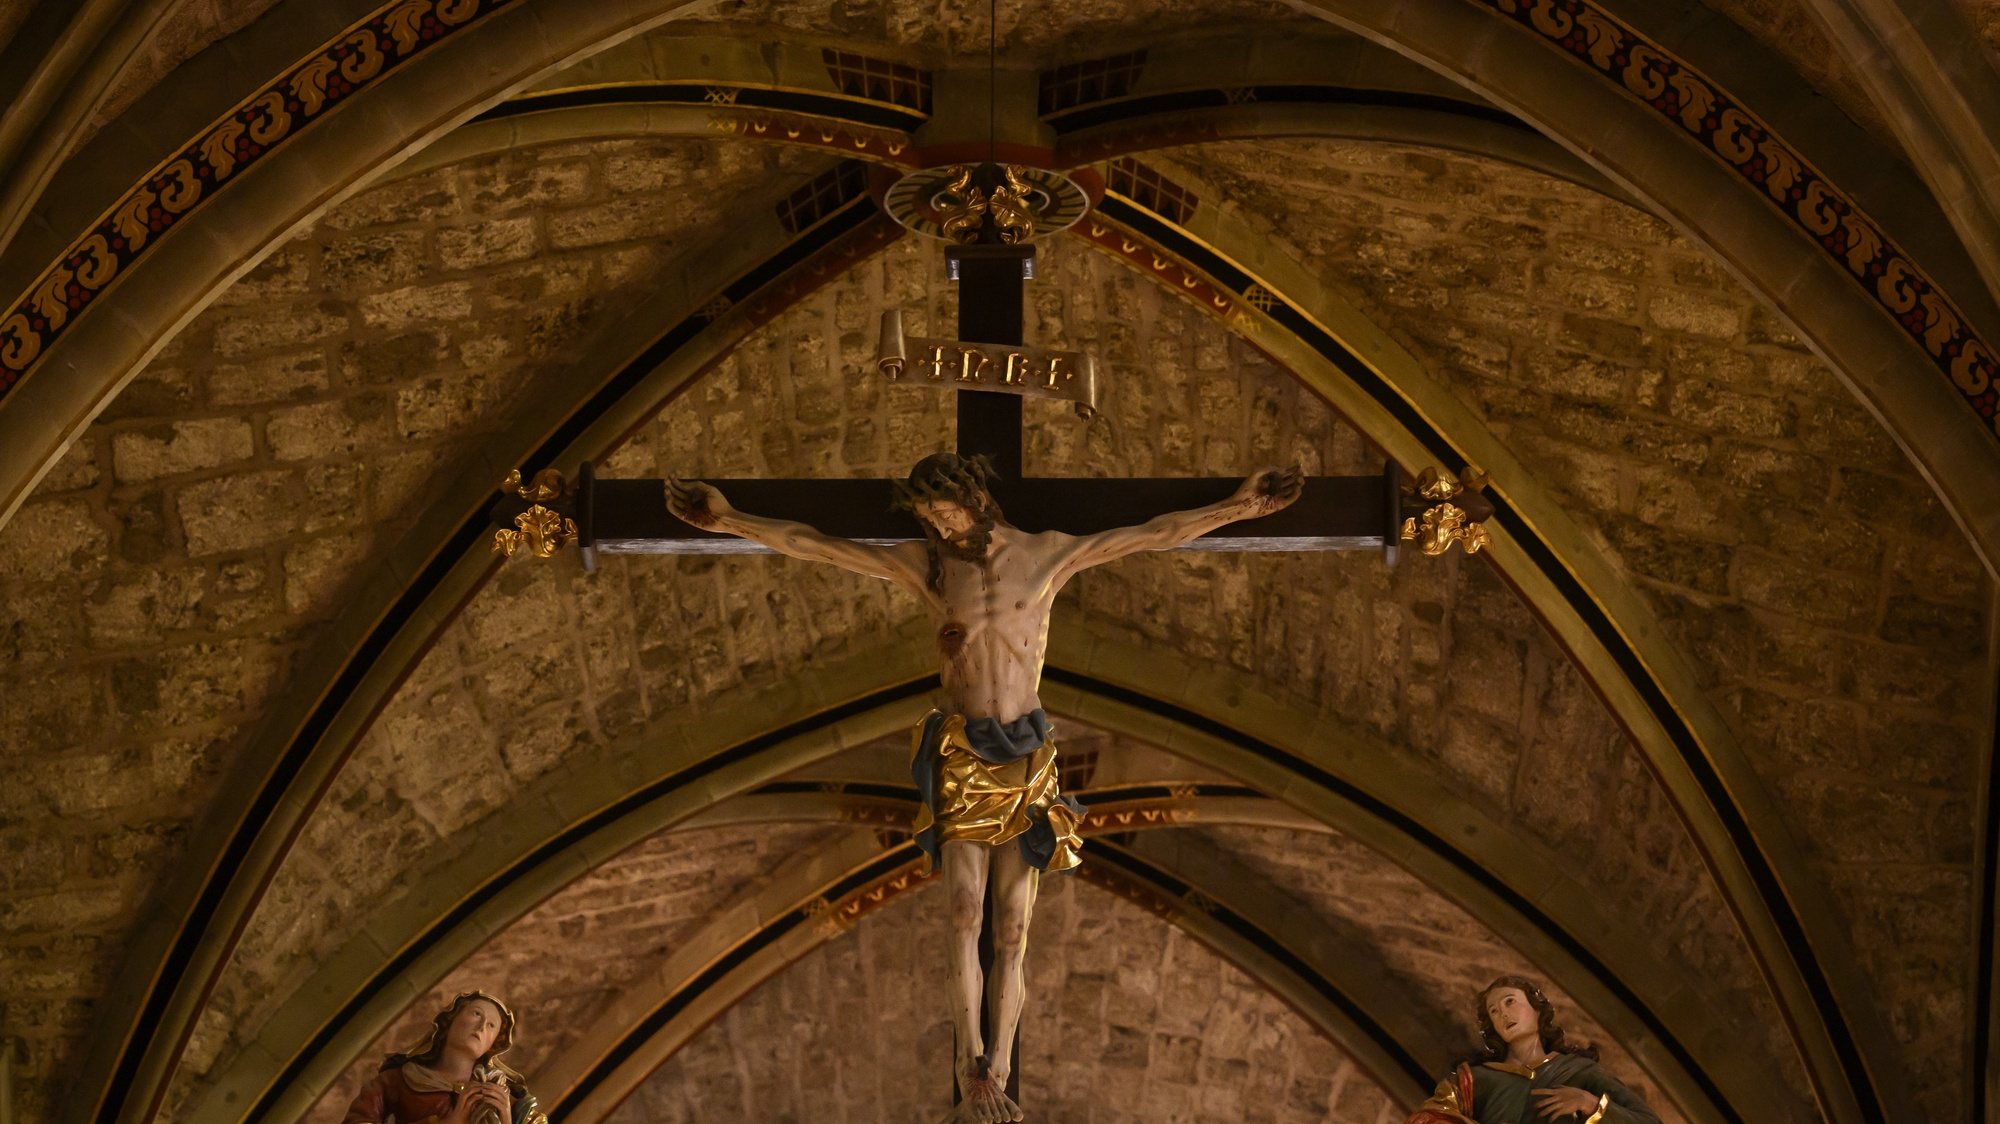 epa09891645 A statue representing the crucified Christ during the Good Friday mass at the Collegiale de Notre-Dame de l&#039;Assomption church in Romont, Fribourg, Switzerland, 15 April 2022. Following the Good Friday mass in a ceremony to commemorate the suffering and death of Jesus, veiled women known as &#039;Les Pleureuses&#039; (The Mourning Women) carry the symbols of the Passion: a crown of thorns, a whip, a hammer, tongs, and St. Veronica&#039;s shroud, preceded by a penitent, wearing a black hood and carrying a large cross.  EPA/ANTHONY ANEX